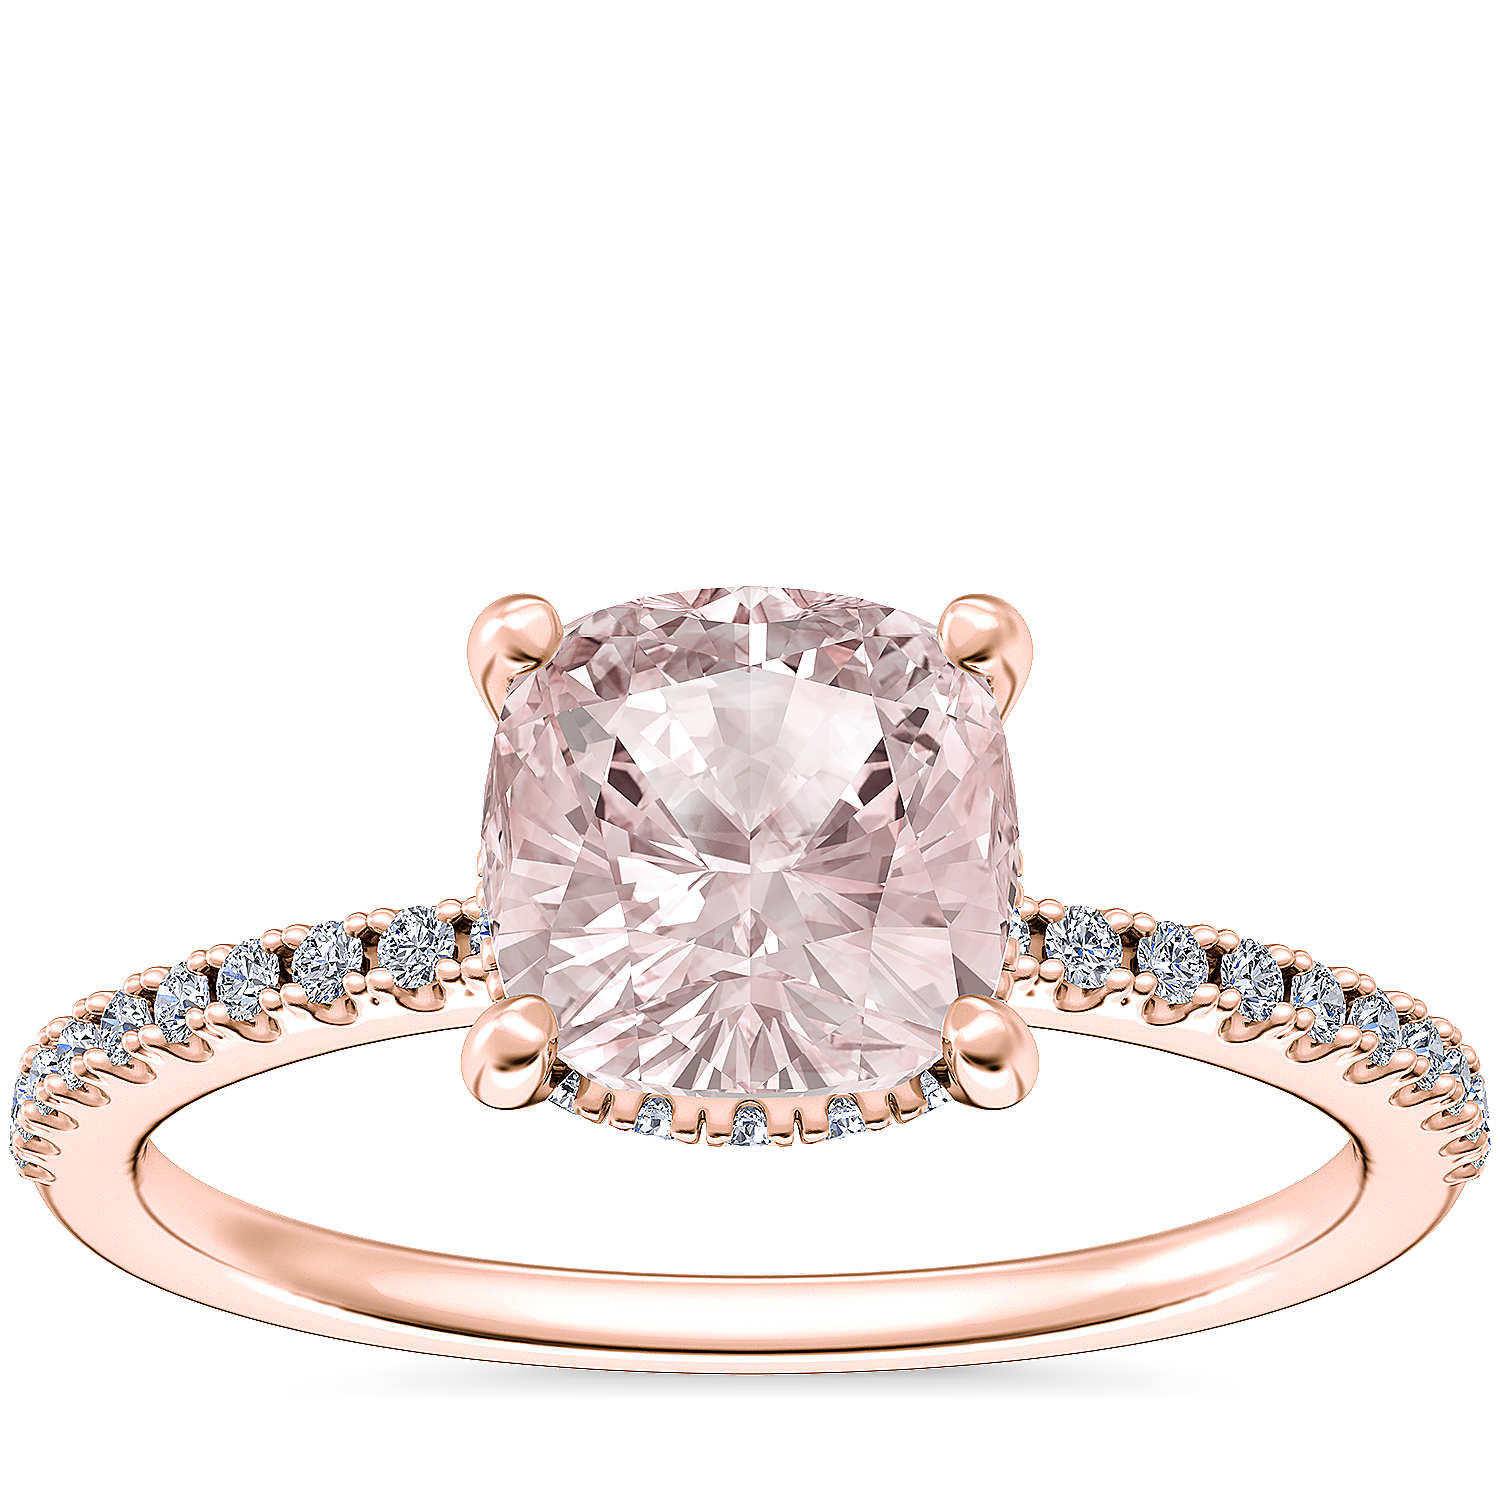 Petite Micropave Hidden Halo Engagement Ring with Cushion Morganite in 14k Rose Gold (6.5mm)